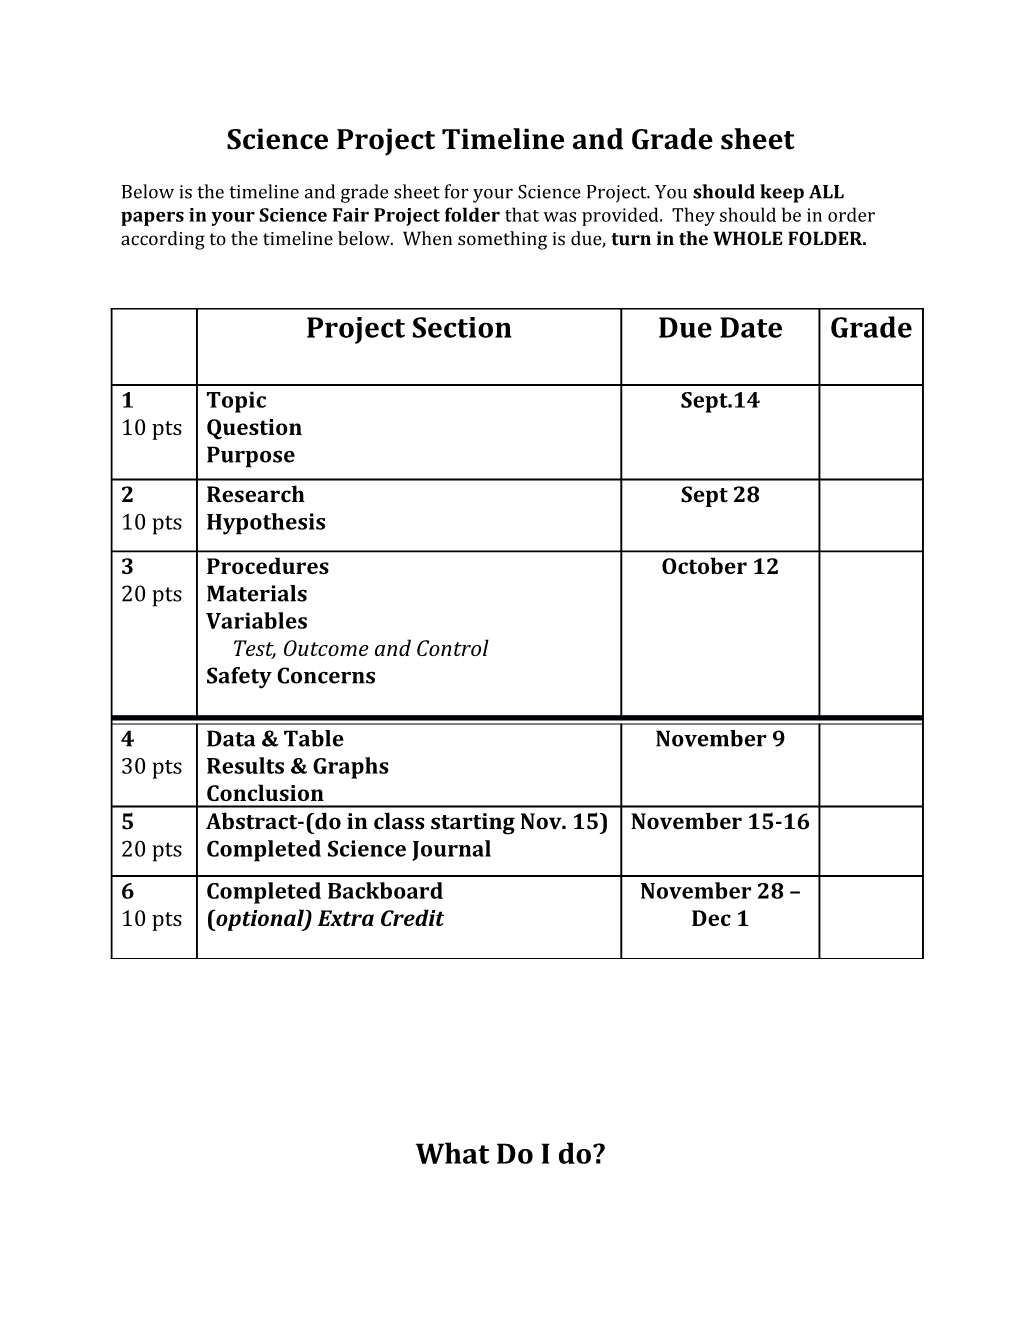 Science Project Timeline and Grade Sheet